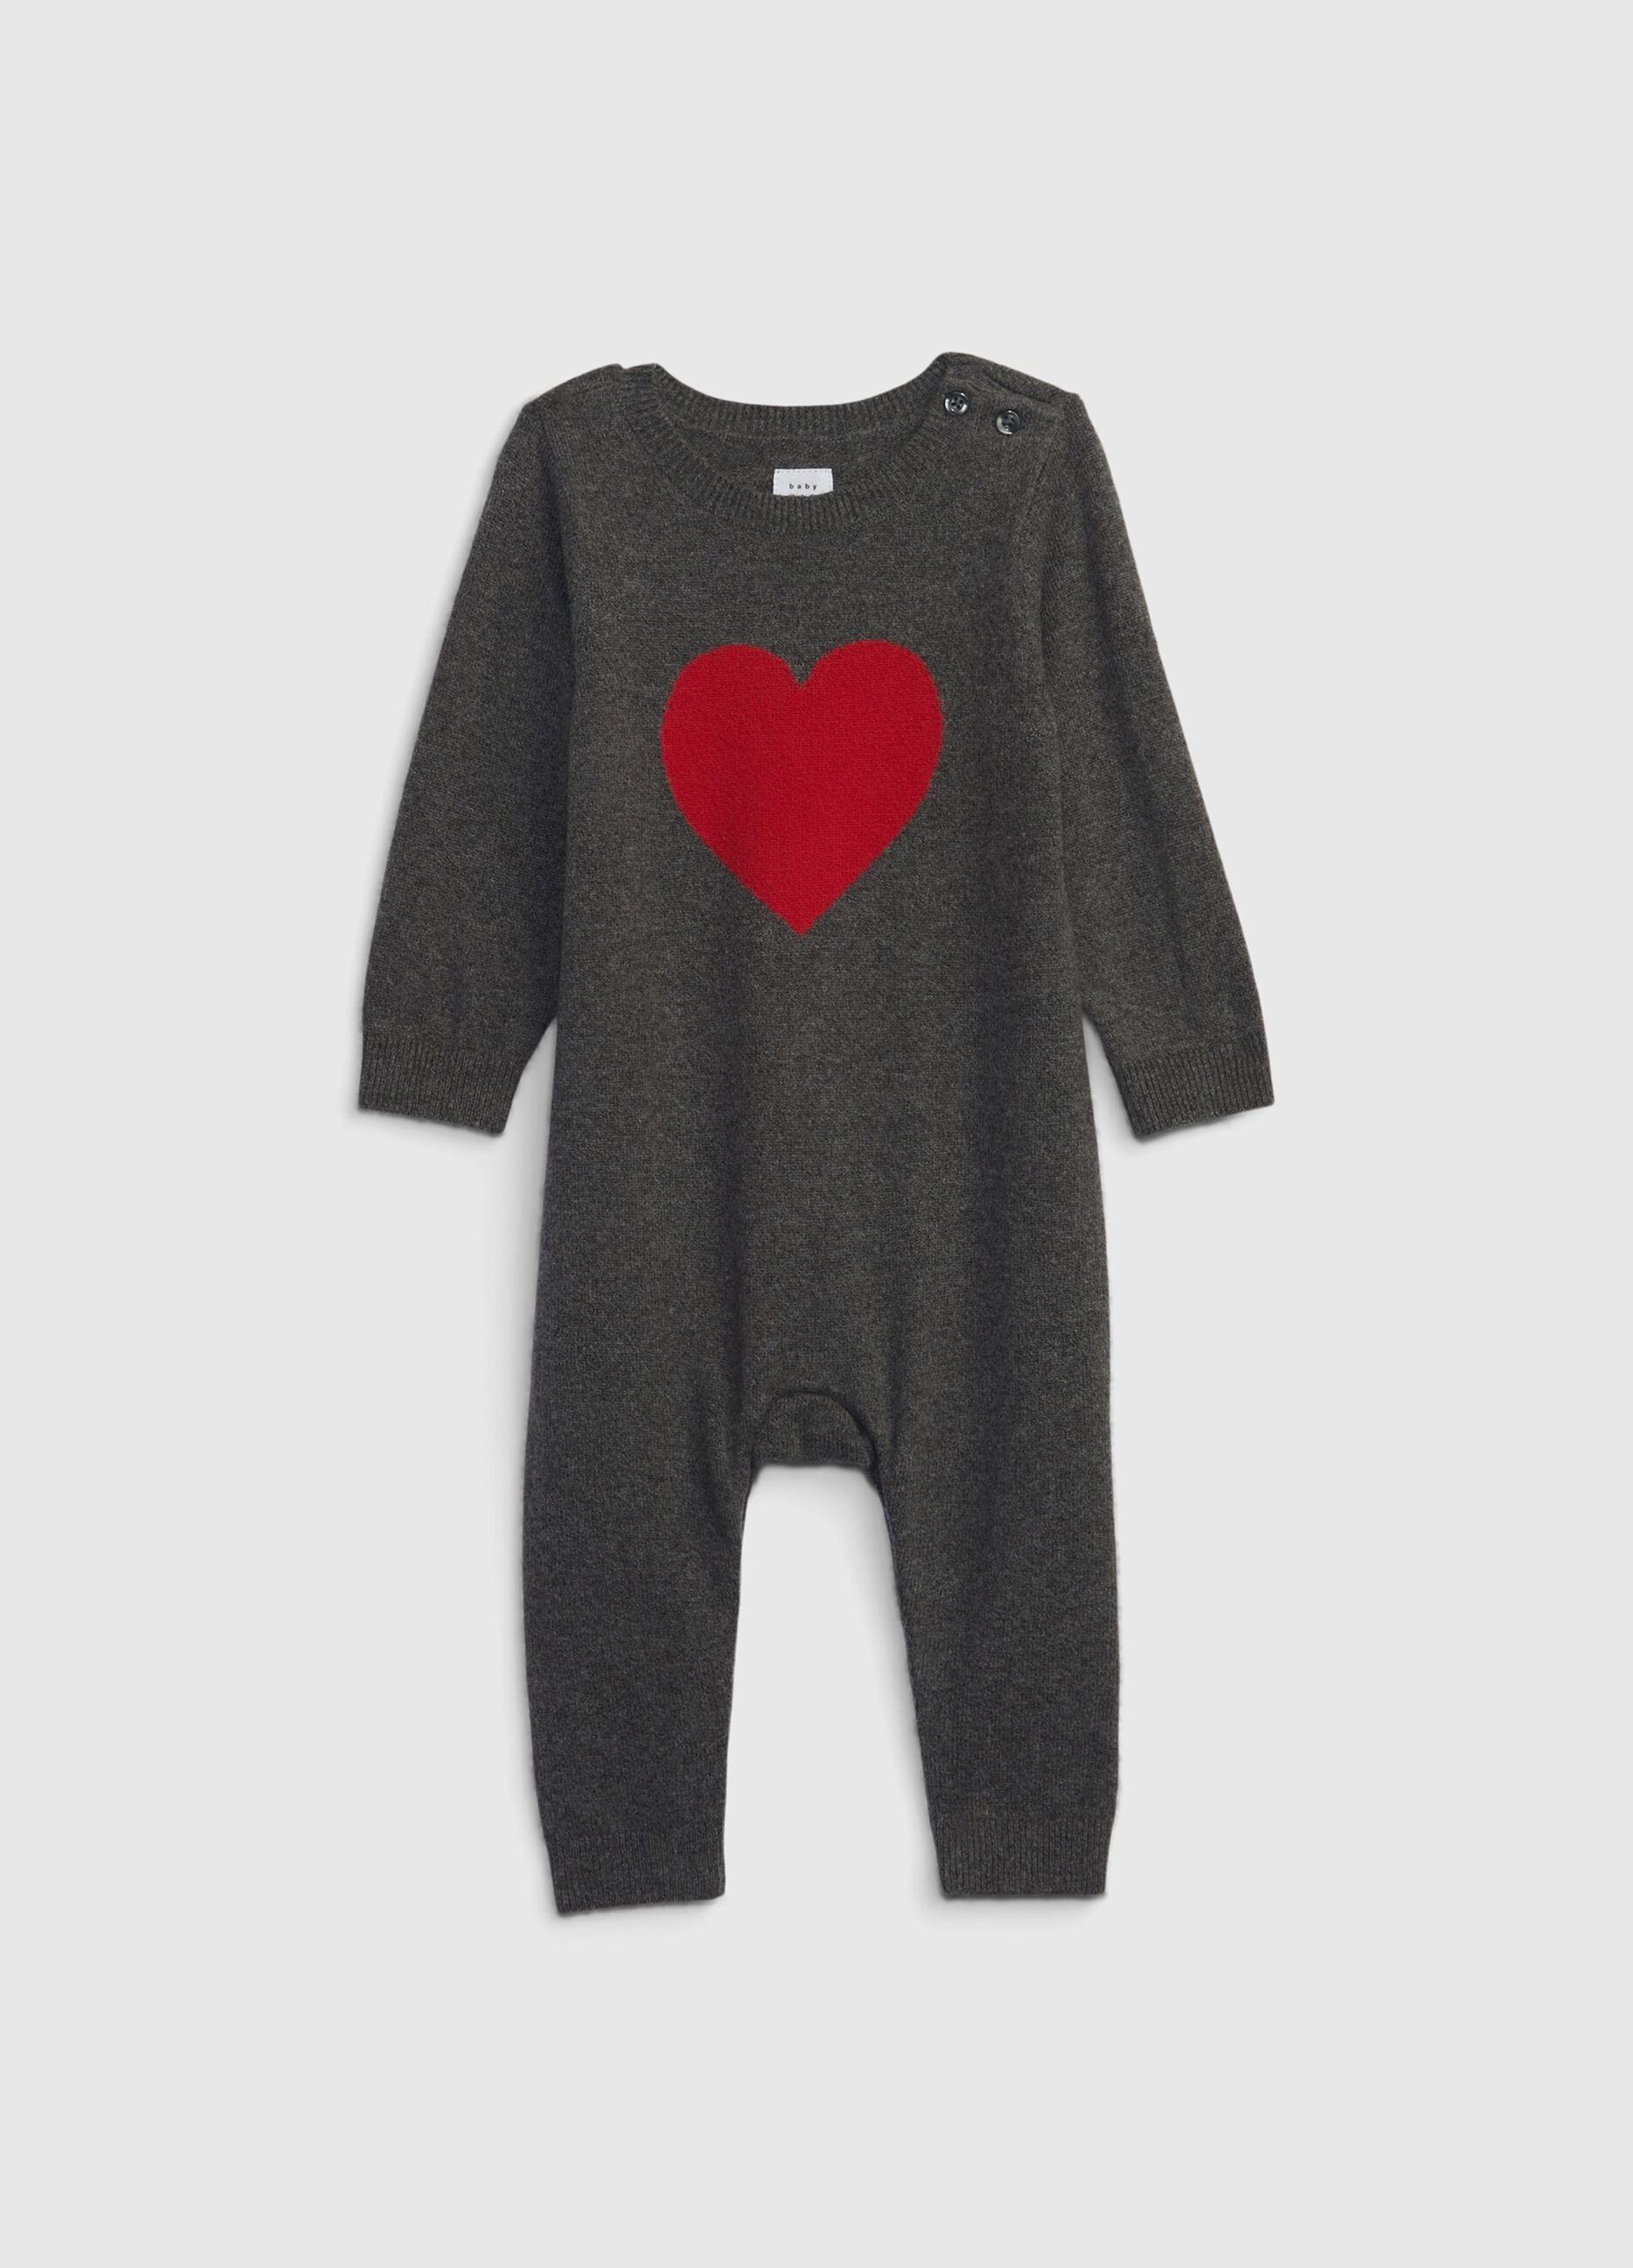 Jersey onesie with heart jacquard design